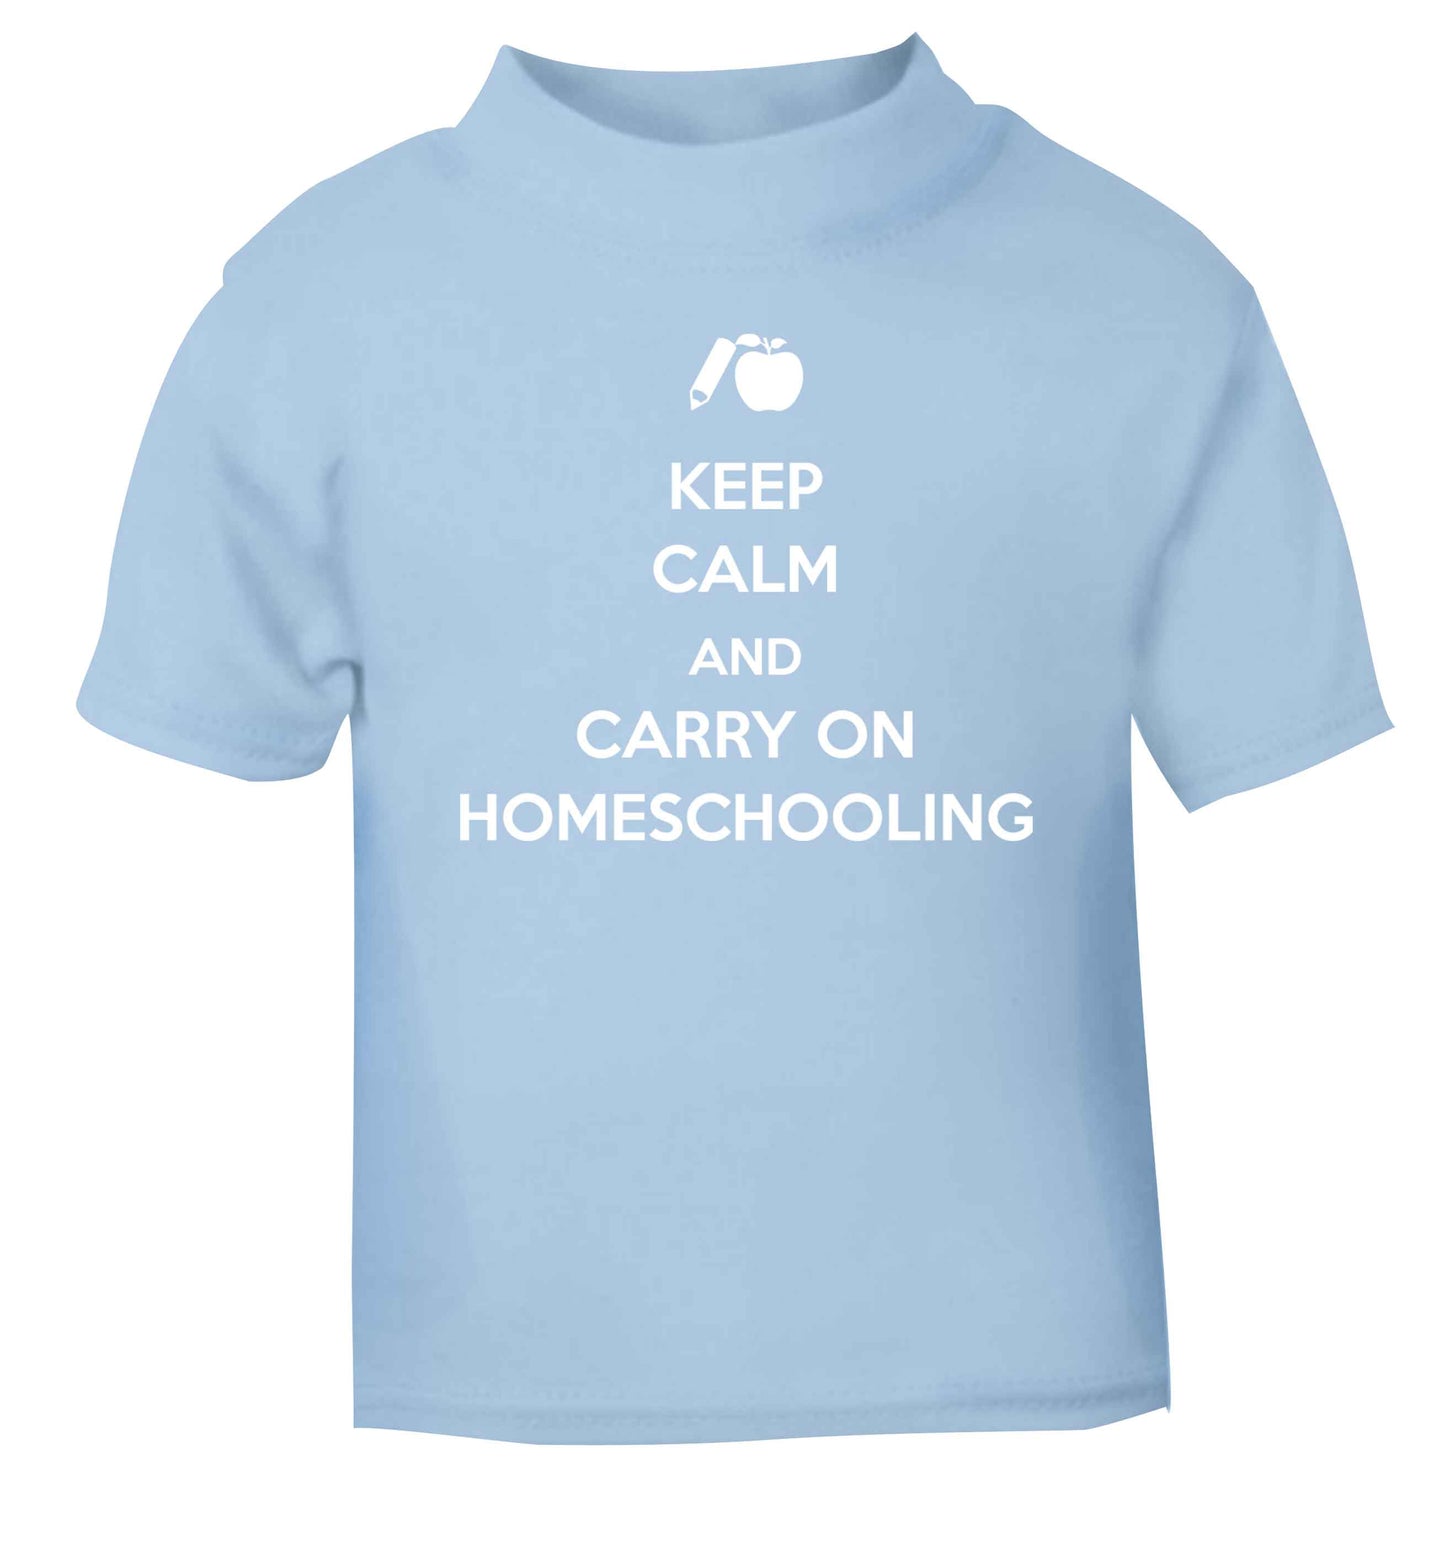 Keep calm and carry on homeschooling light blue Baby Toddler Tshirt 2 Years